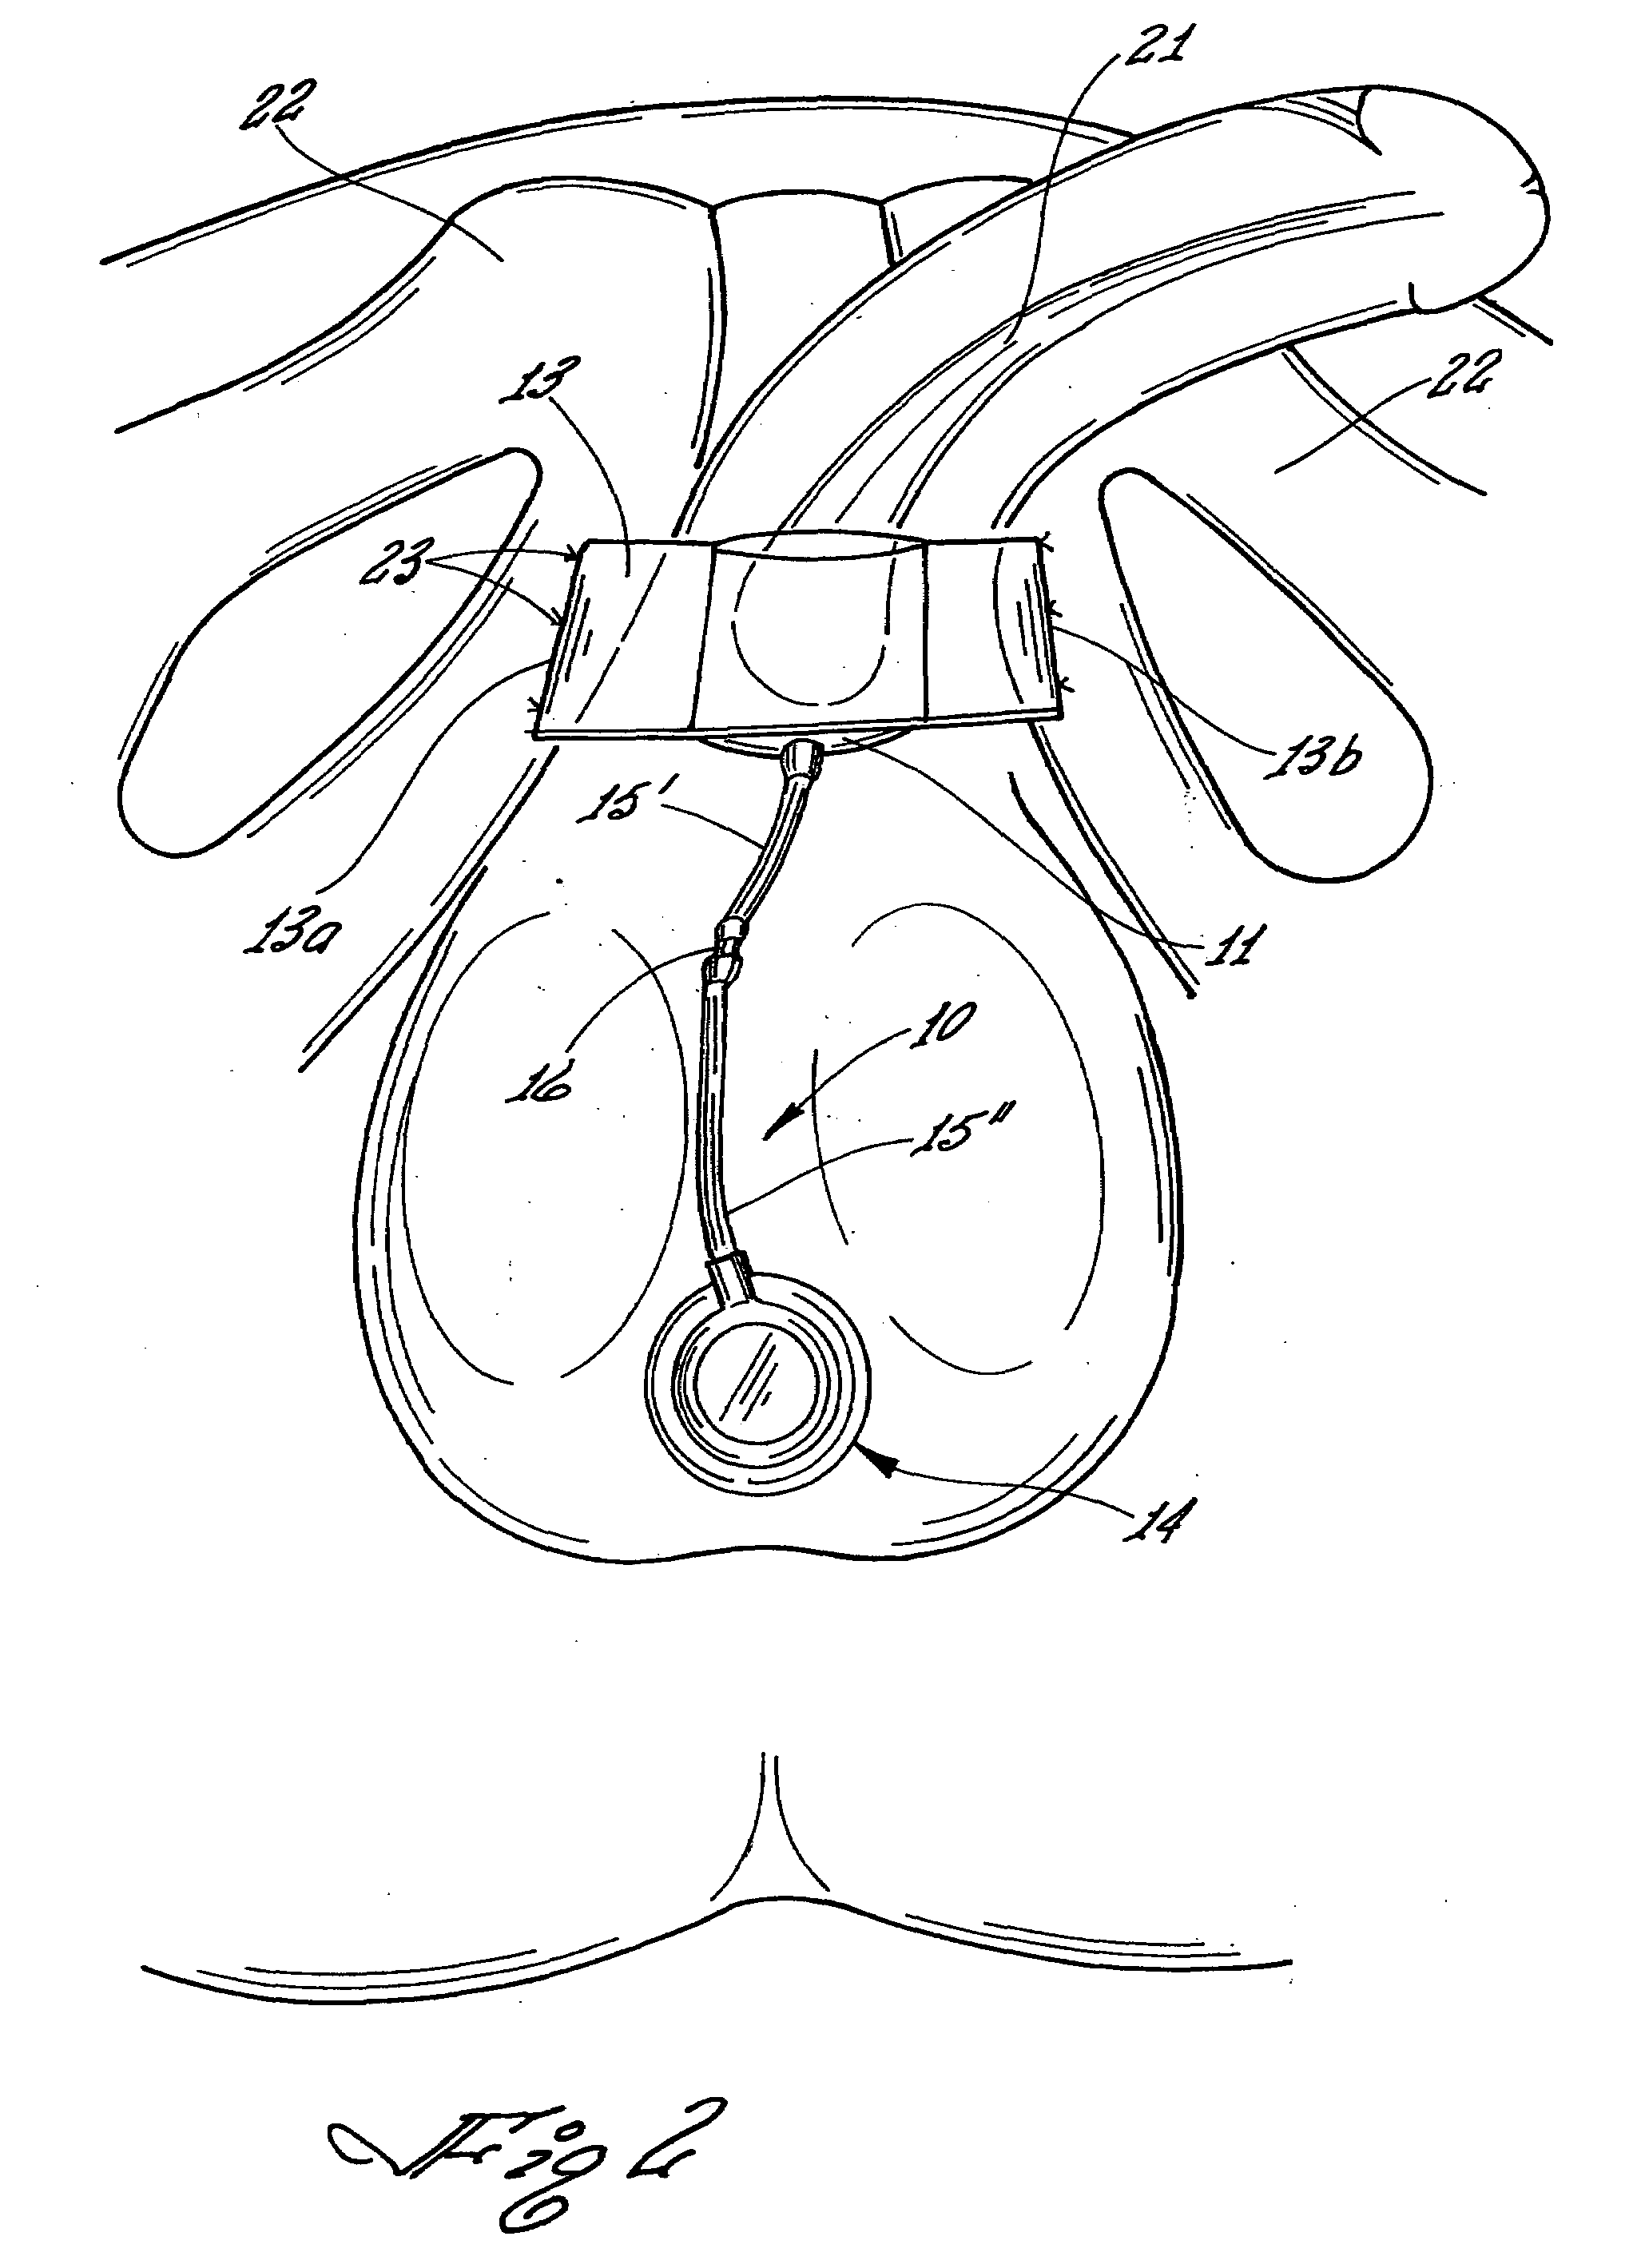 Adjustable implantable male incontinence device